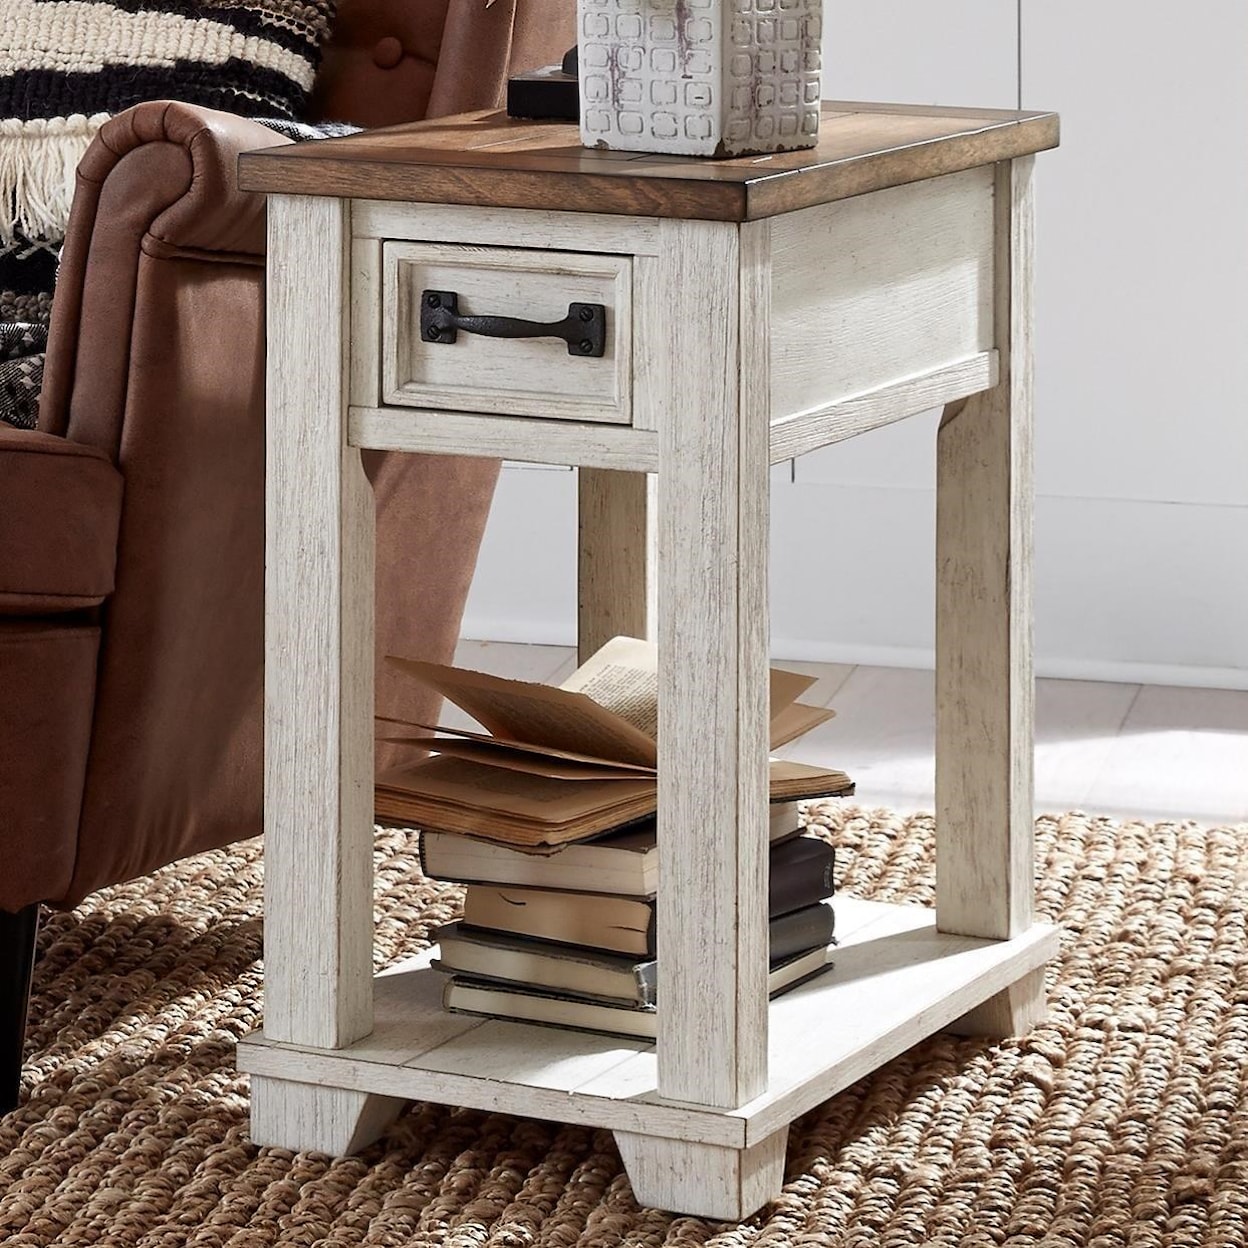 Null Furniture 5519 Chairside End Table